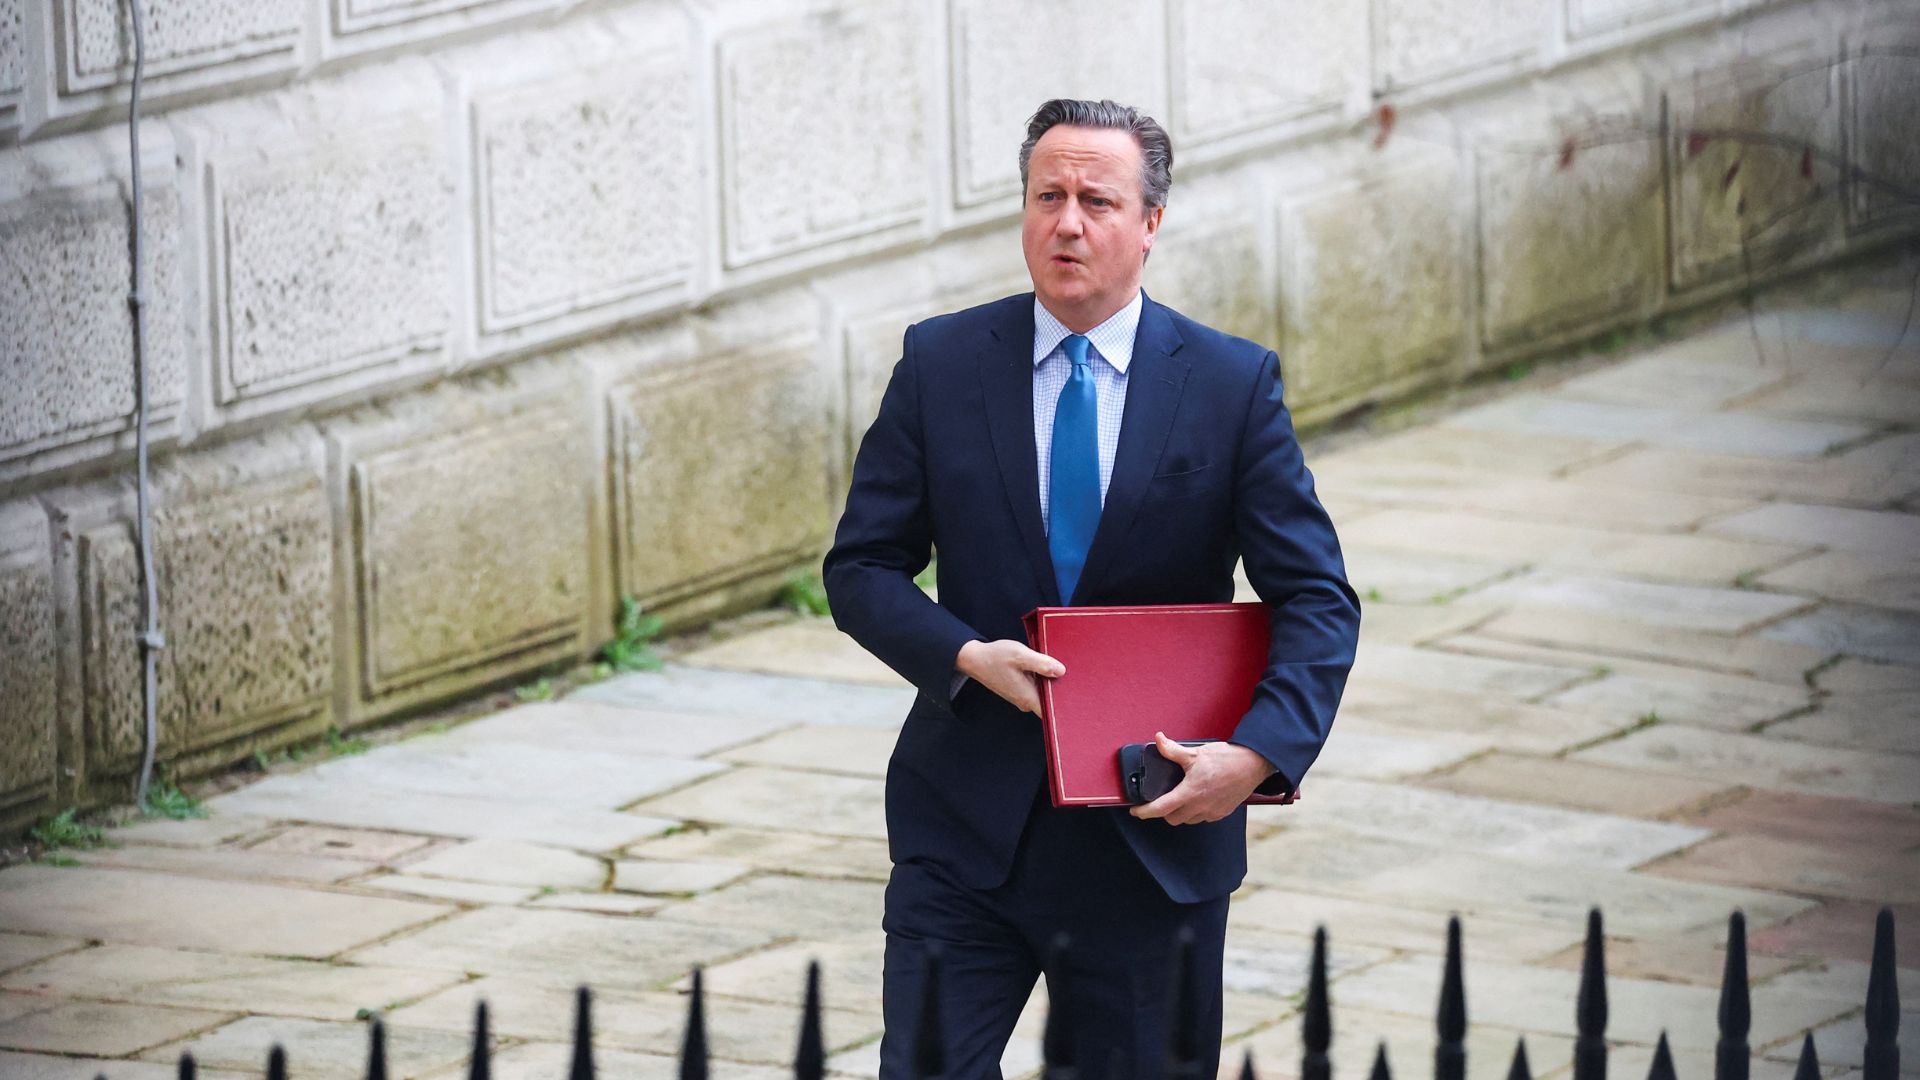 UK Foreign Minister David Cameron walks to attend a cabinet meeting in London. /Toby Melville/Reuters
